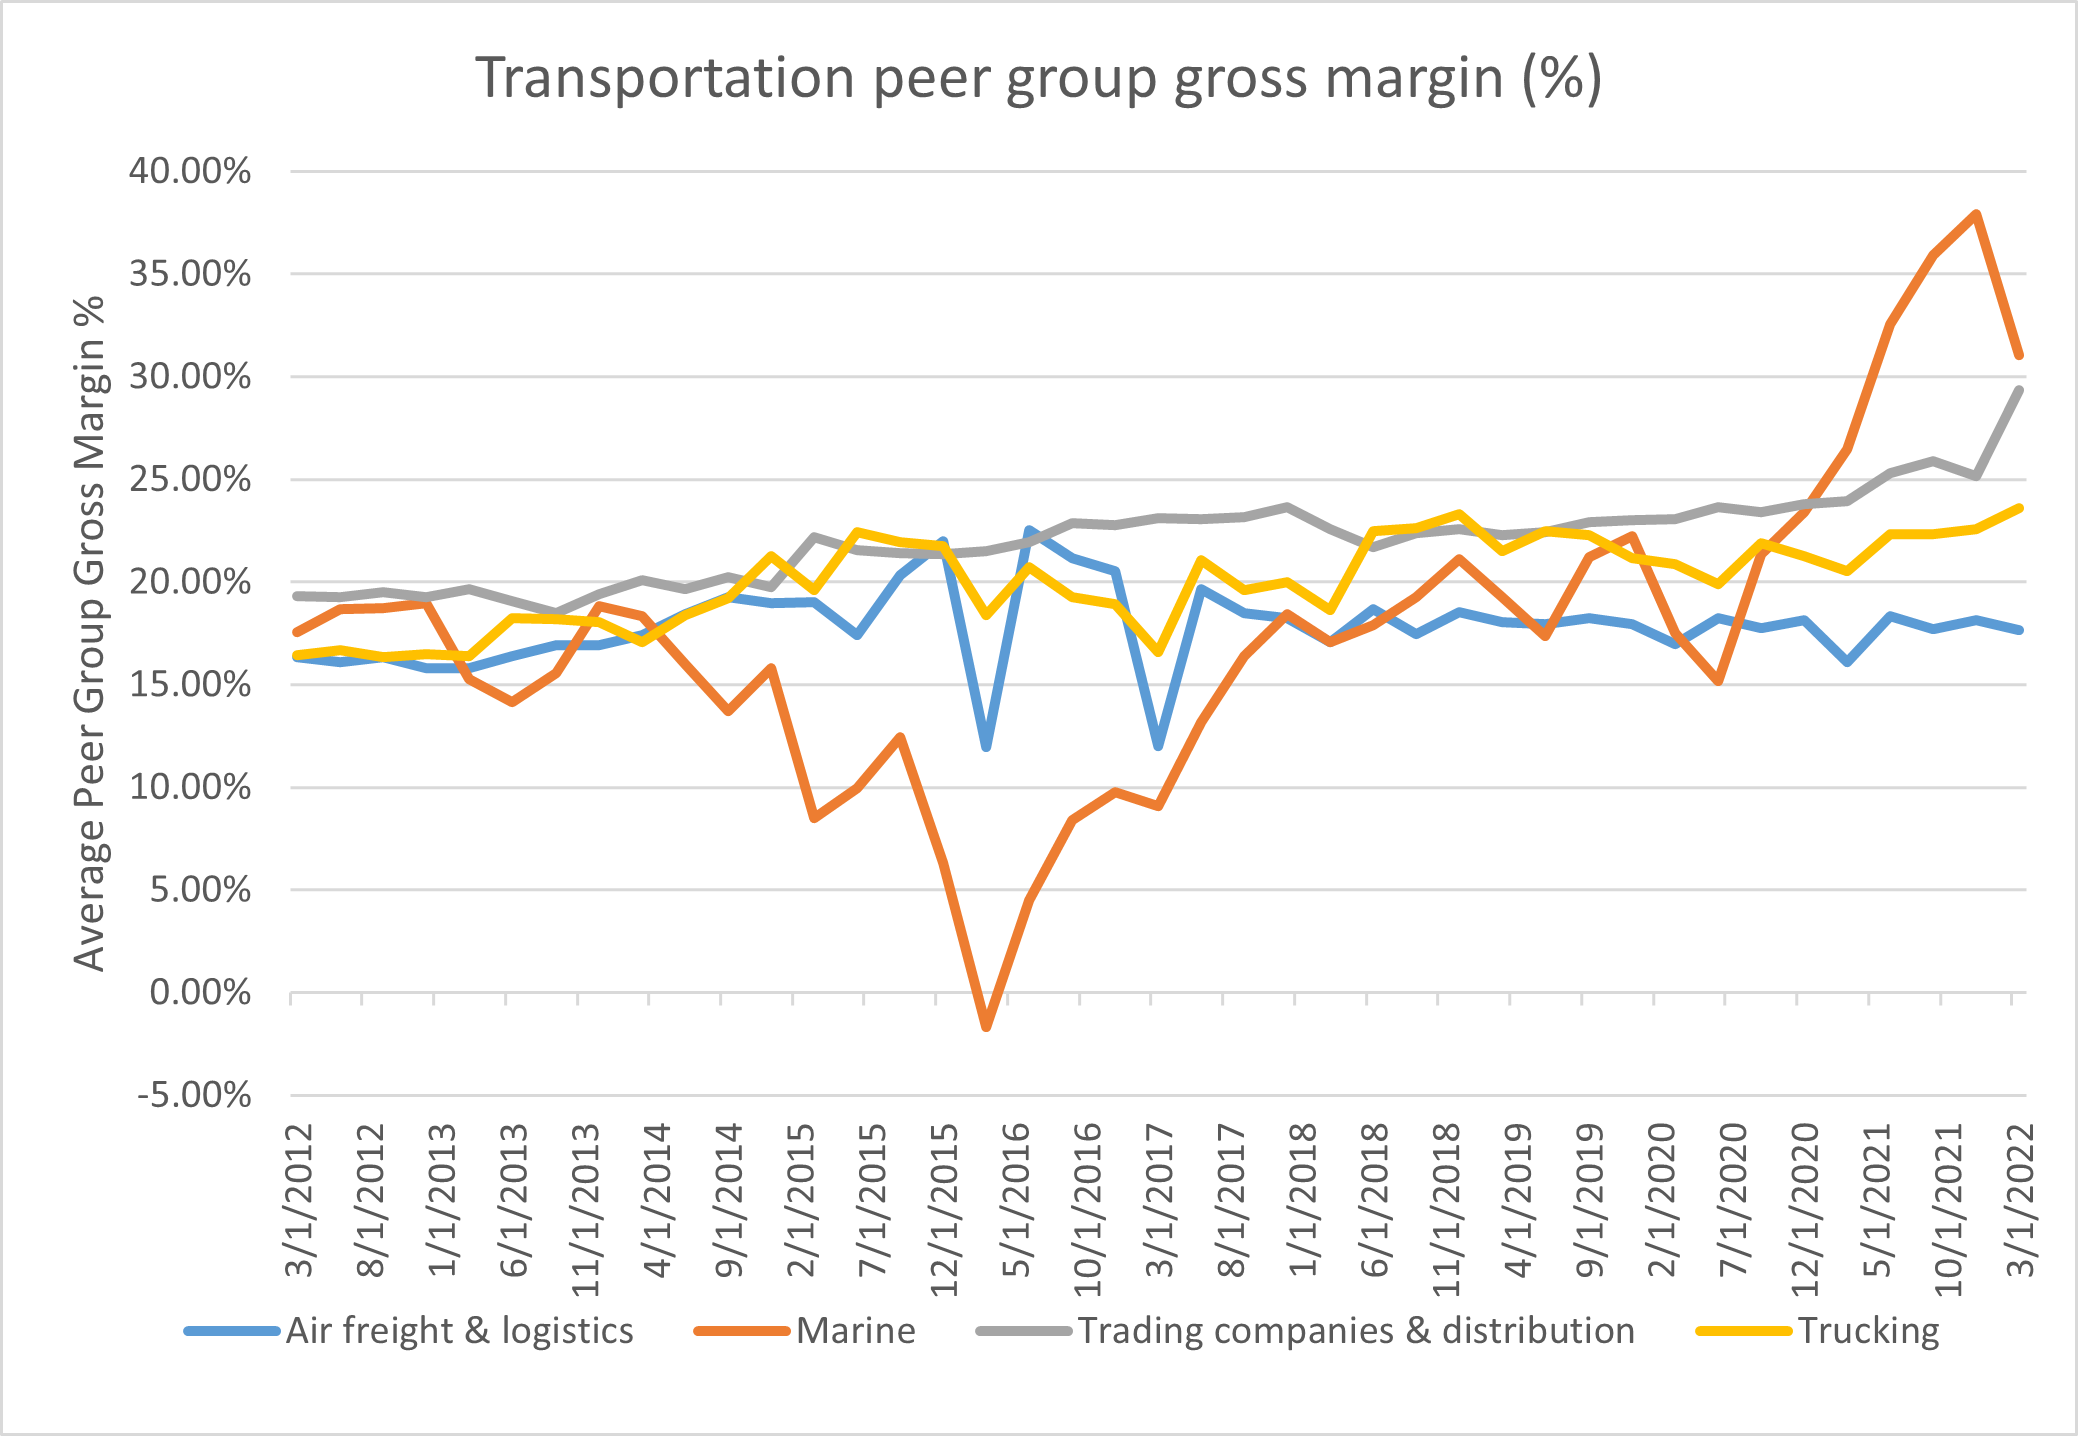 A chart shows gross margins across various sectors of the transportation industry, from 2012 to March 2022